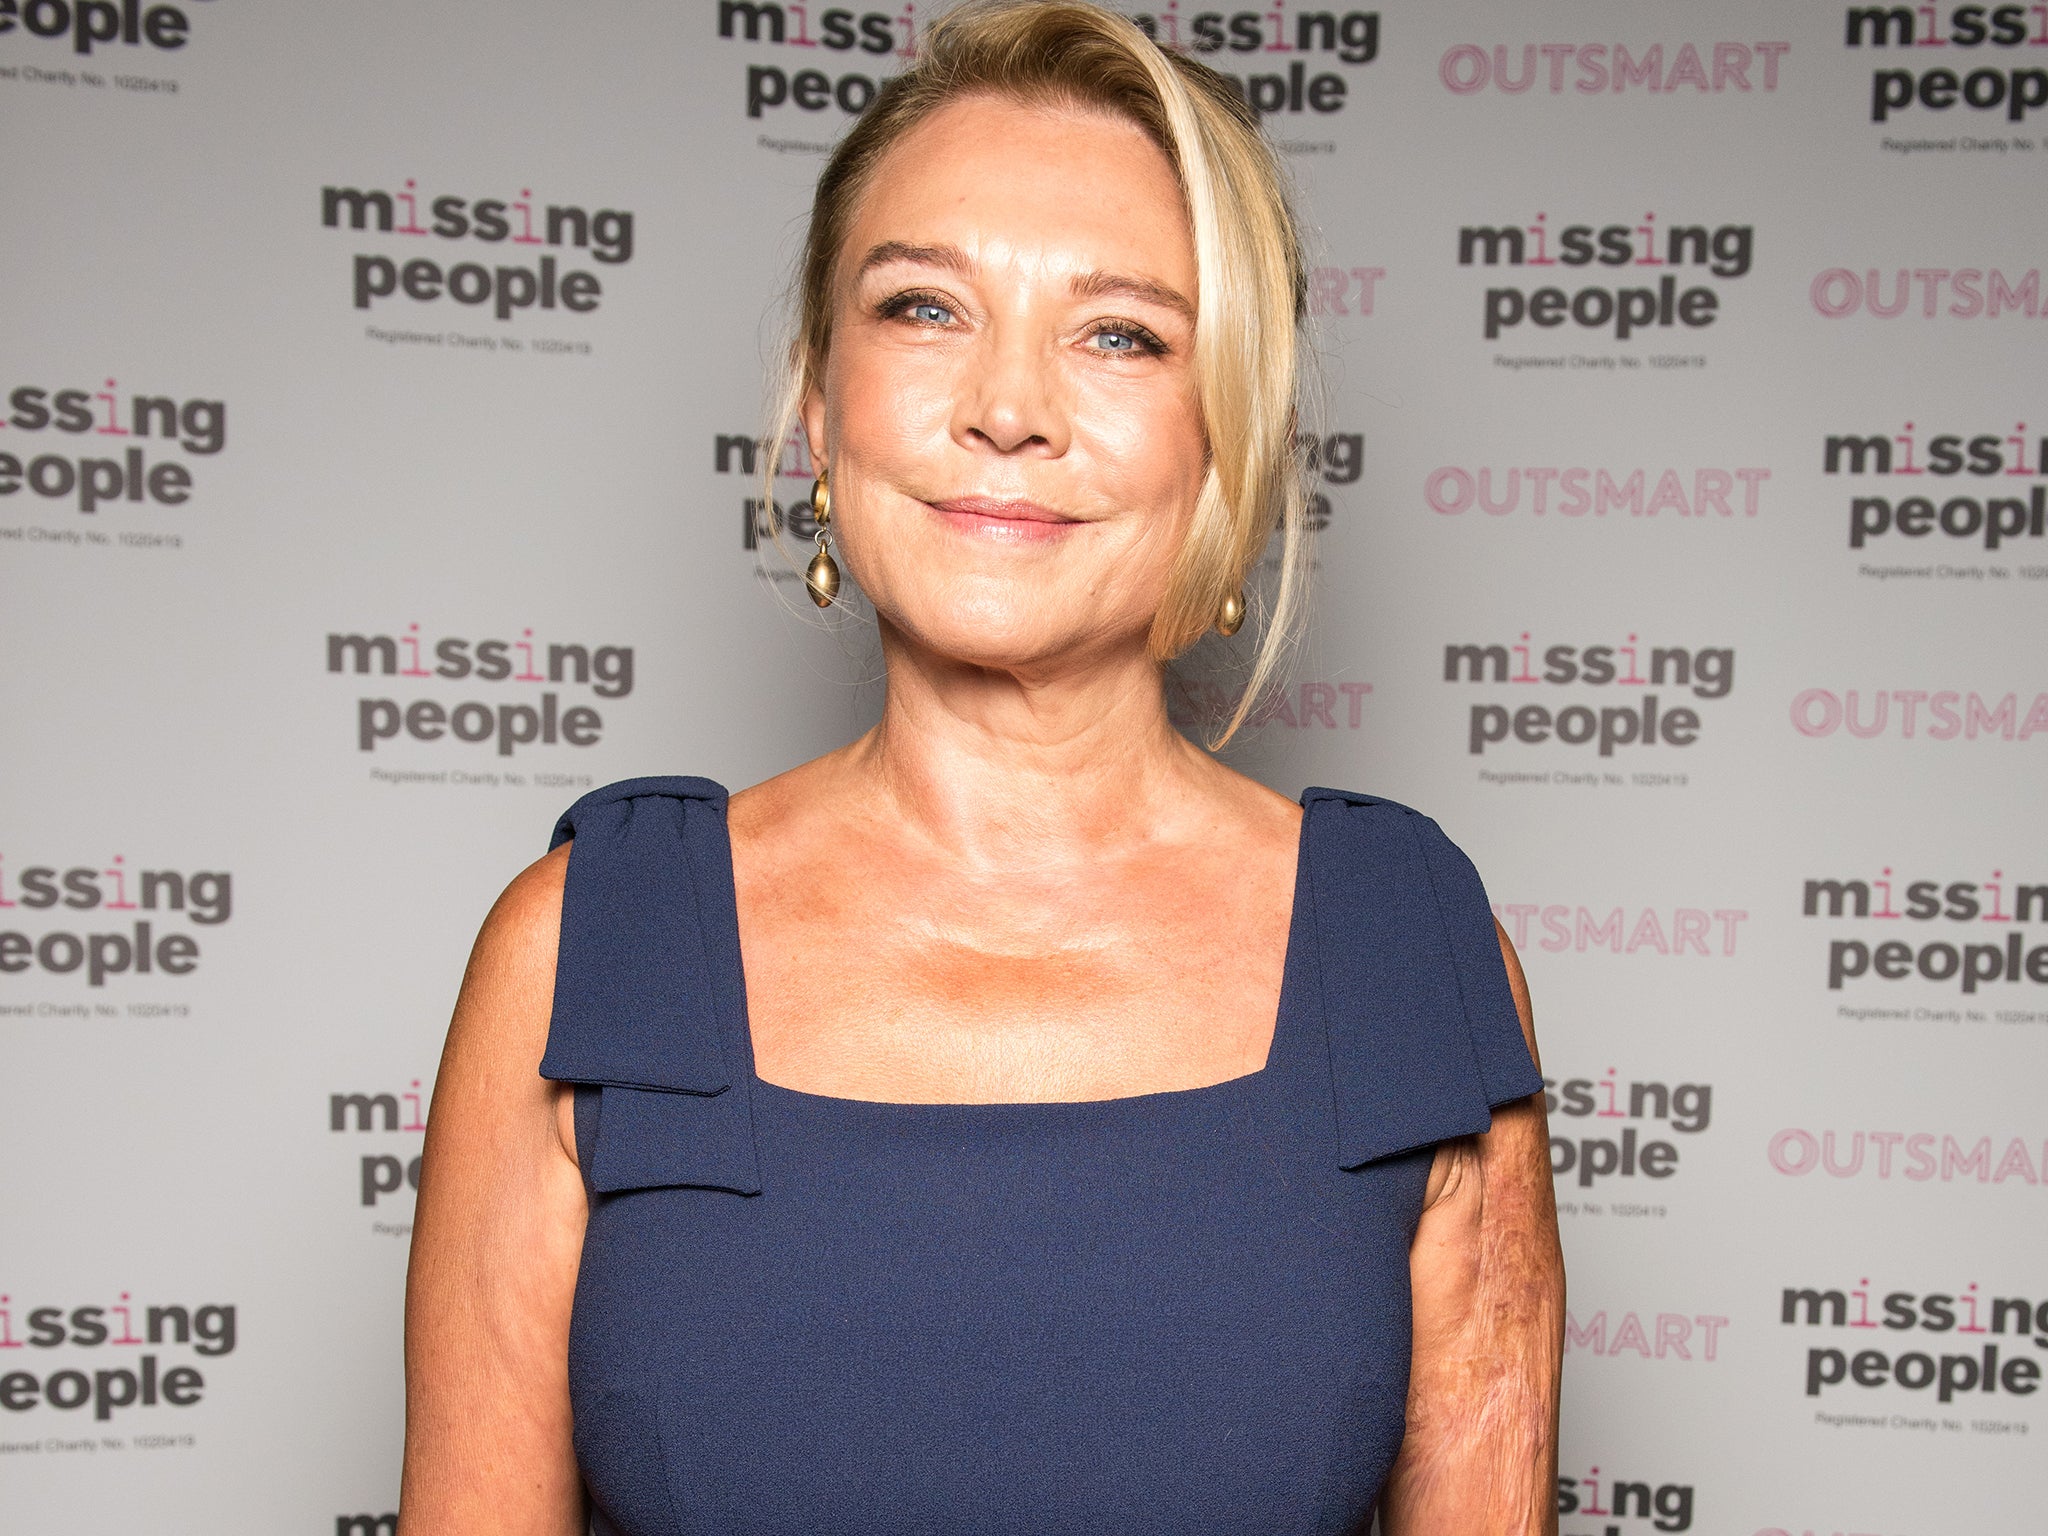 Amanda Redman was treated at St Ormond street at aged 3 for severe burns